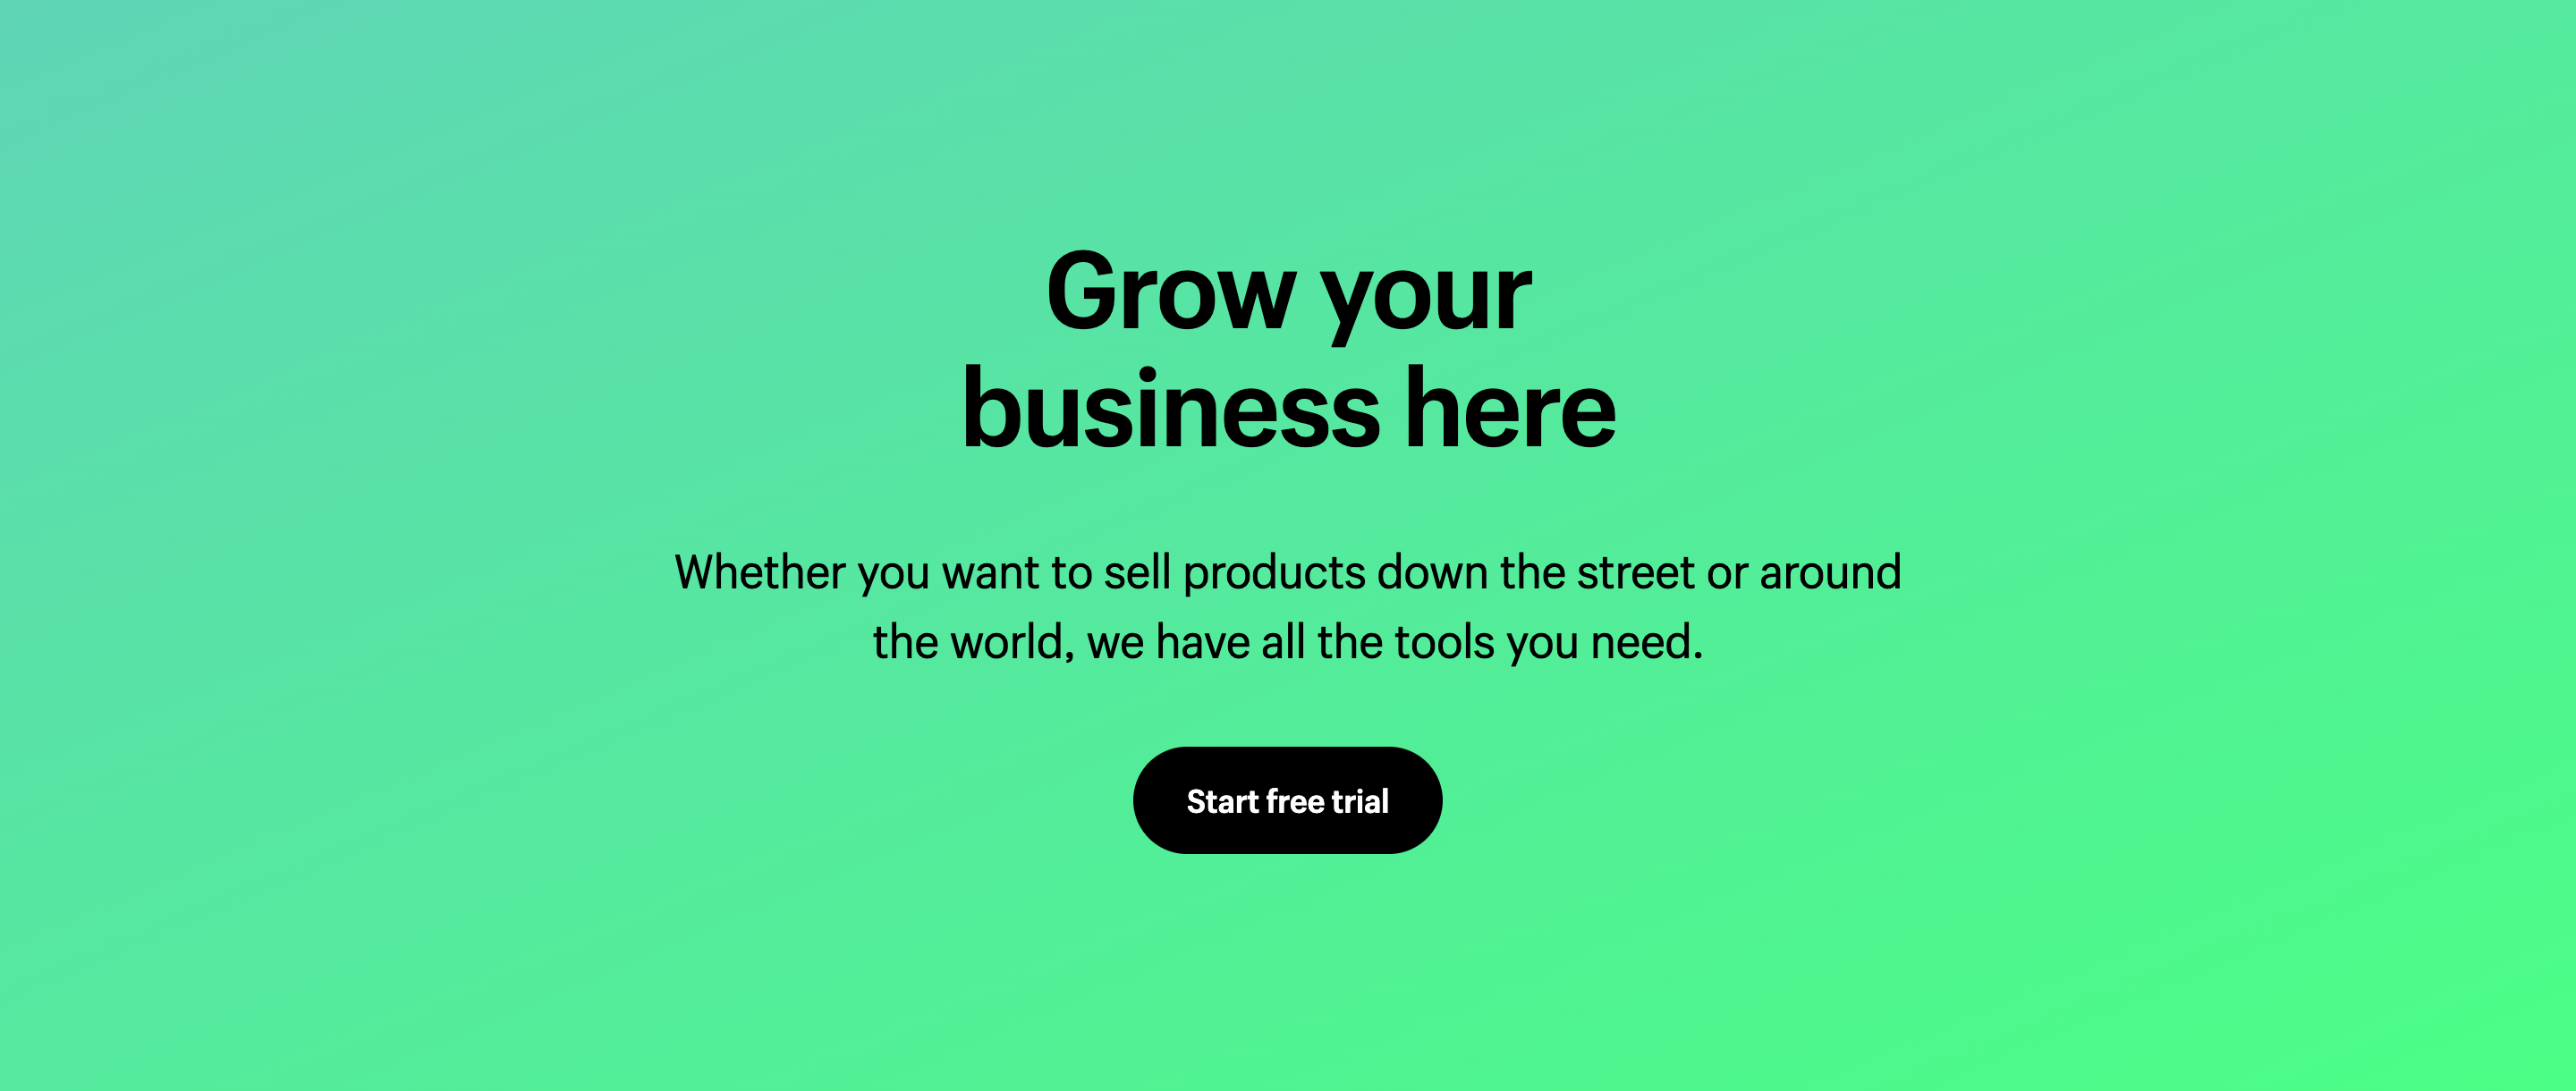 Screenshot of a call-to-action section on the Shopify website with a headline, a subheadline, and a button to start a trial. The text is black on a green gradient background. The button is black and pill-shaped with white text.